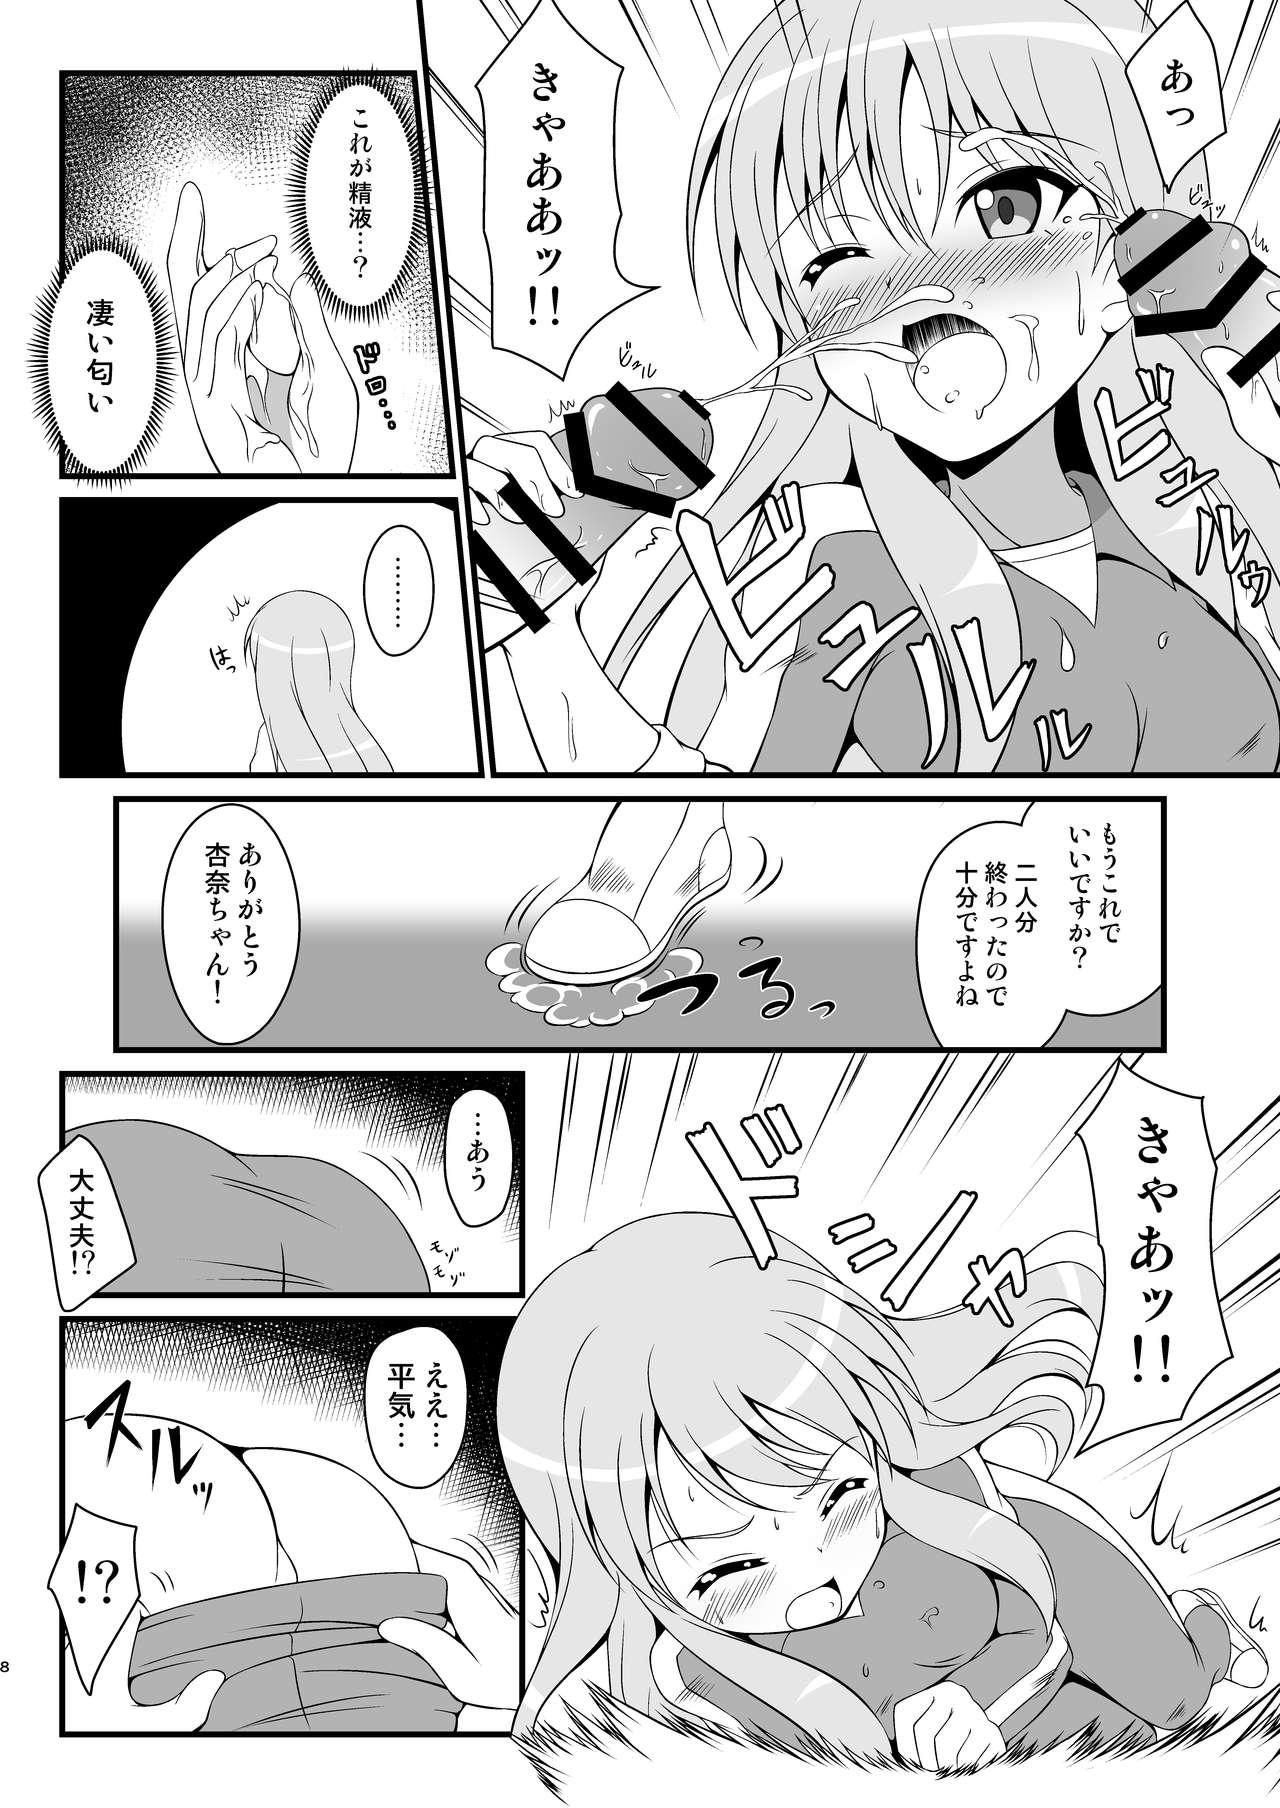 Female Girls Eleven A - Inazuma eleven Pussy To Mouth - Page 7